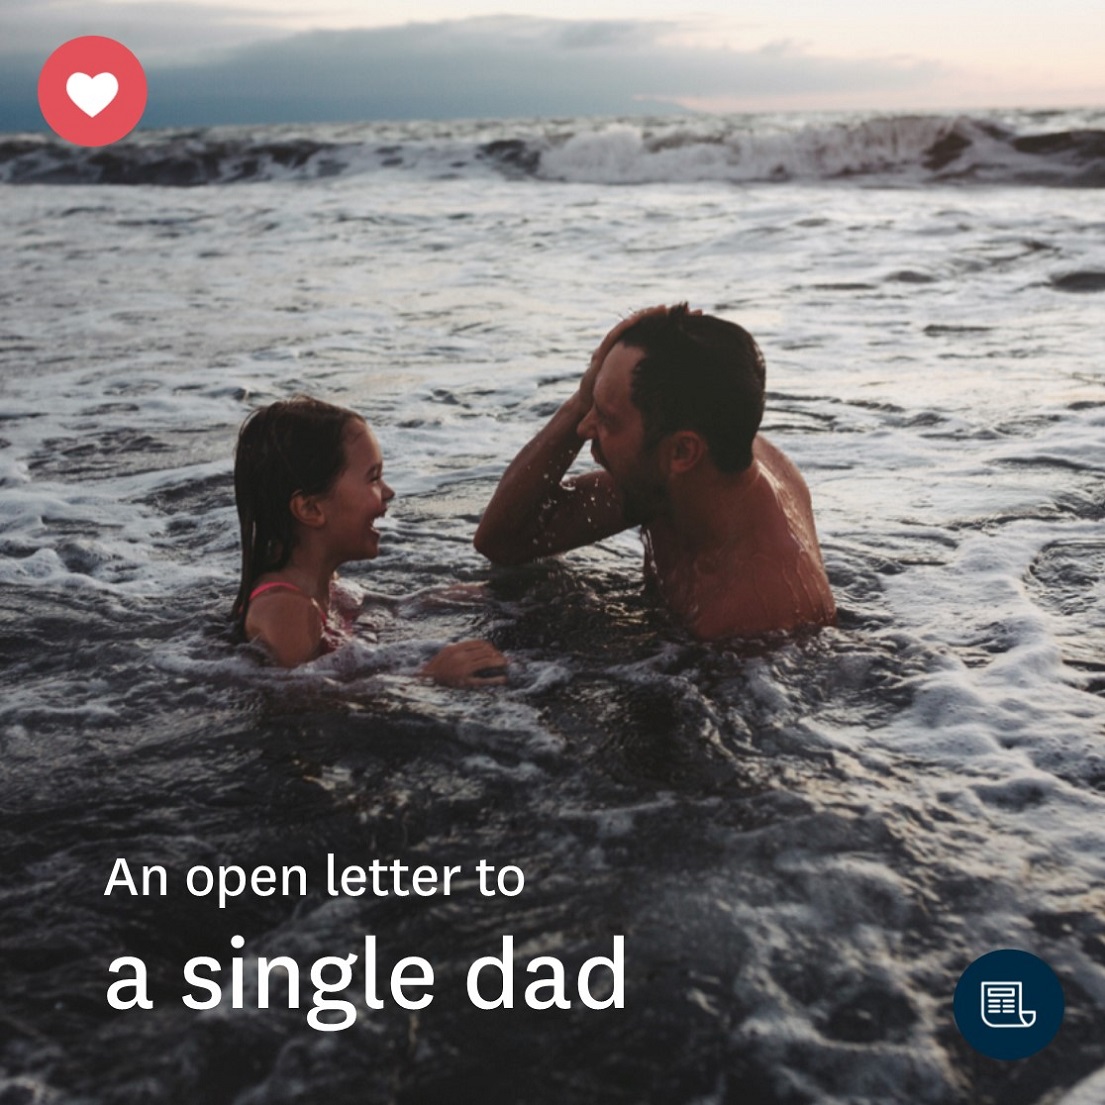 An open letter to a single dad